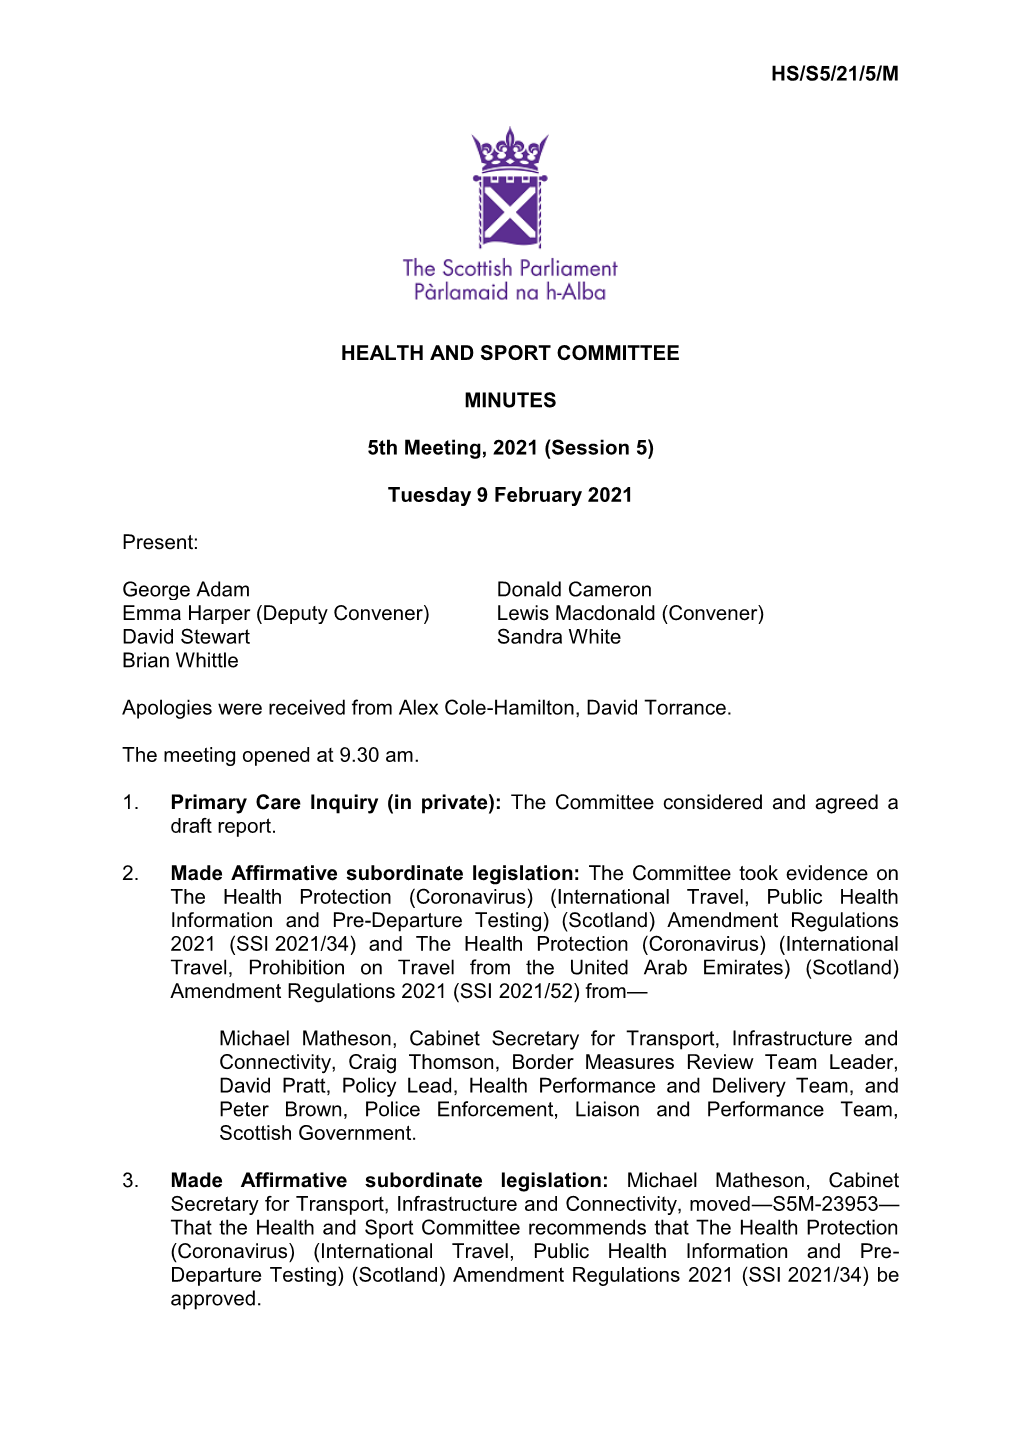 HS/S5/21/5/M HEALTH and SPORT COMMITTEE MINUTES 5Th Meeting